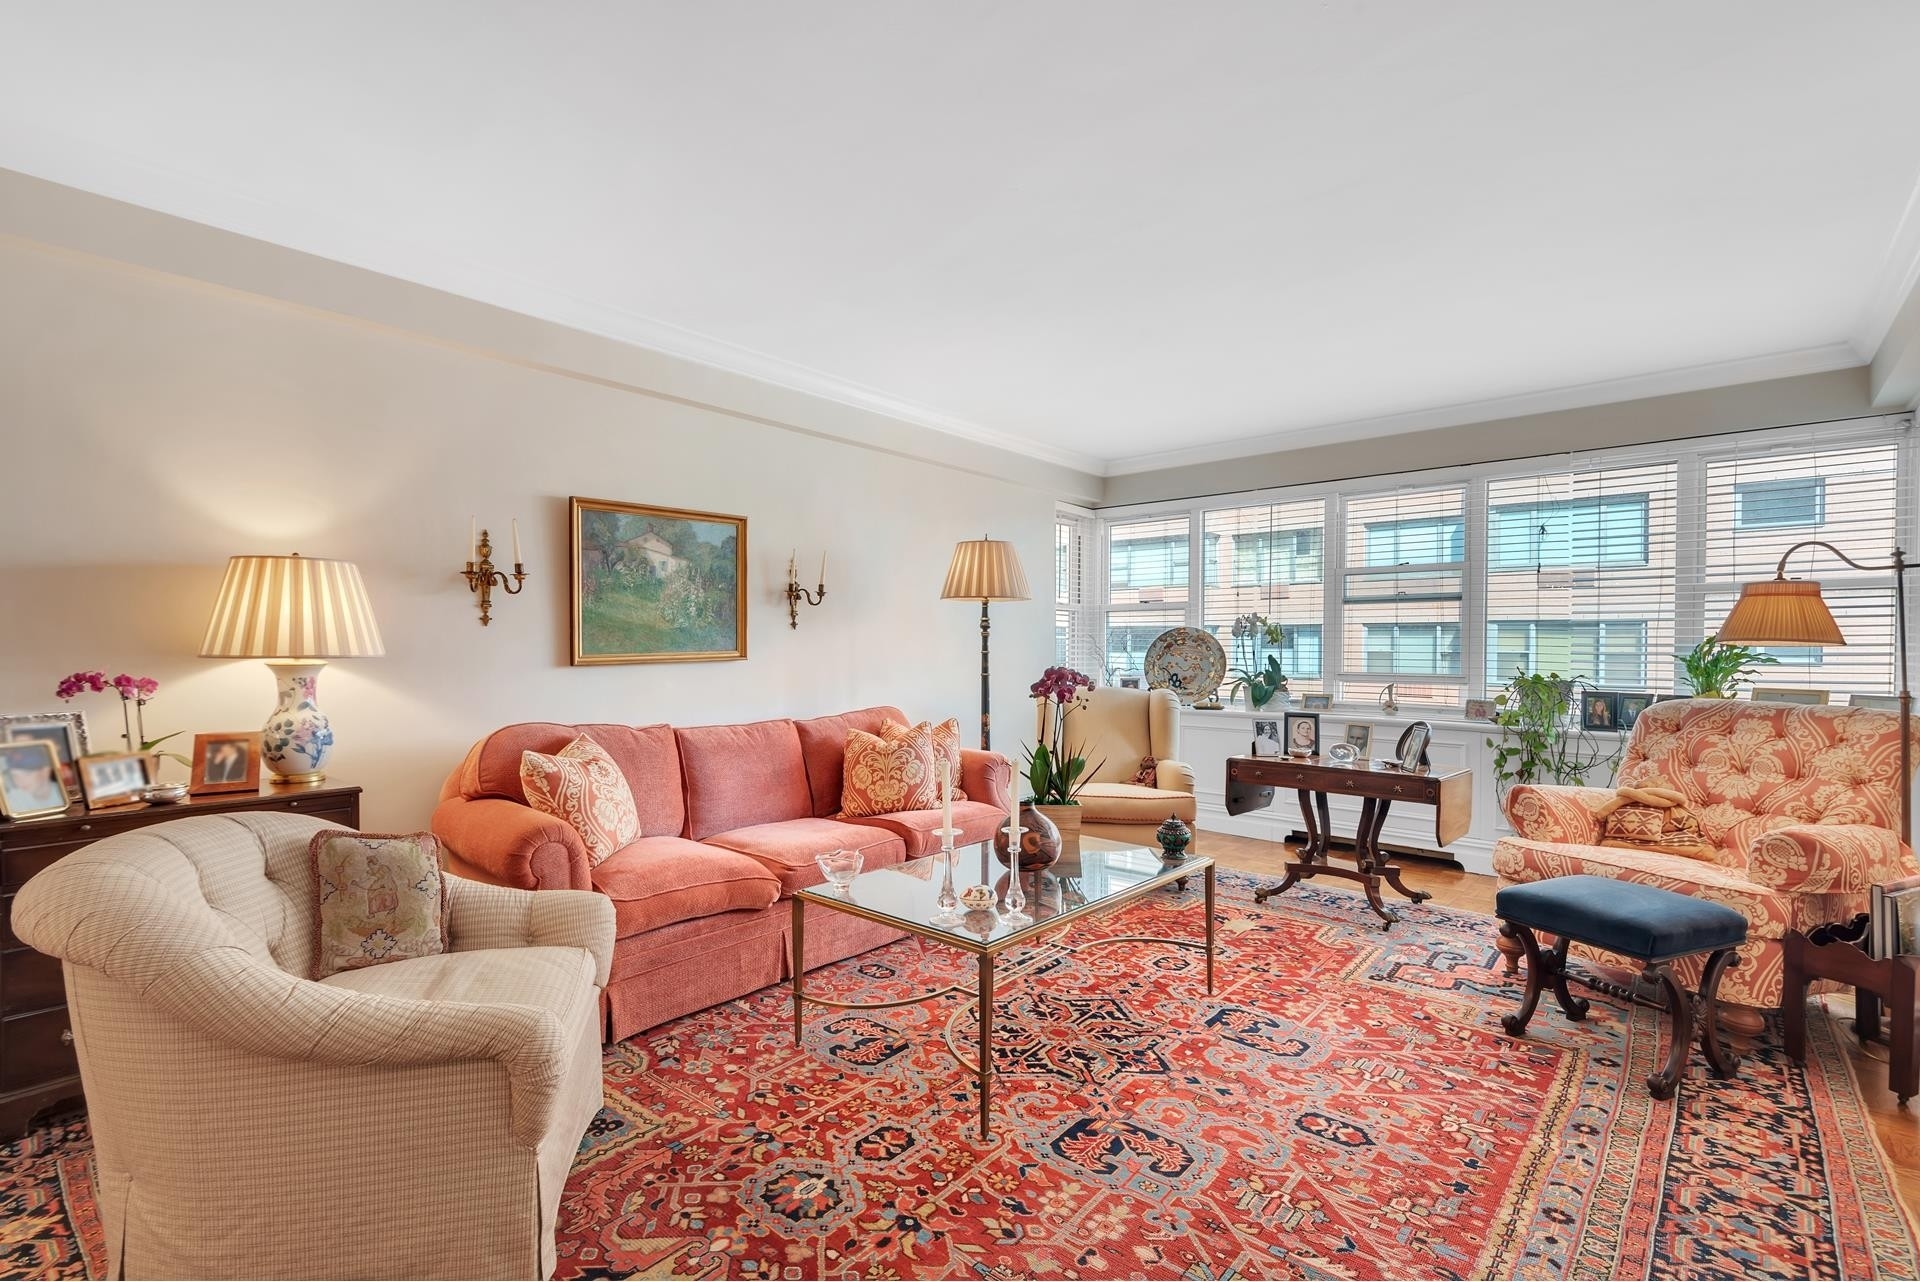 11. Co-op Properties for Sale at Cannon Point South, Inc., 45 SUTTON PL S, 9D Sutton Place, New York, New York 10022